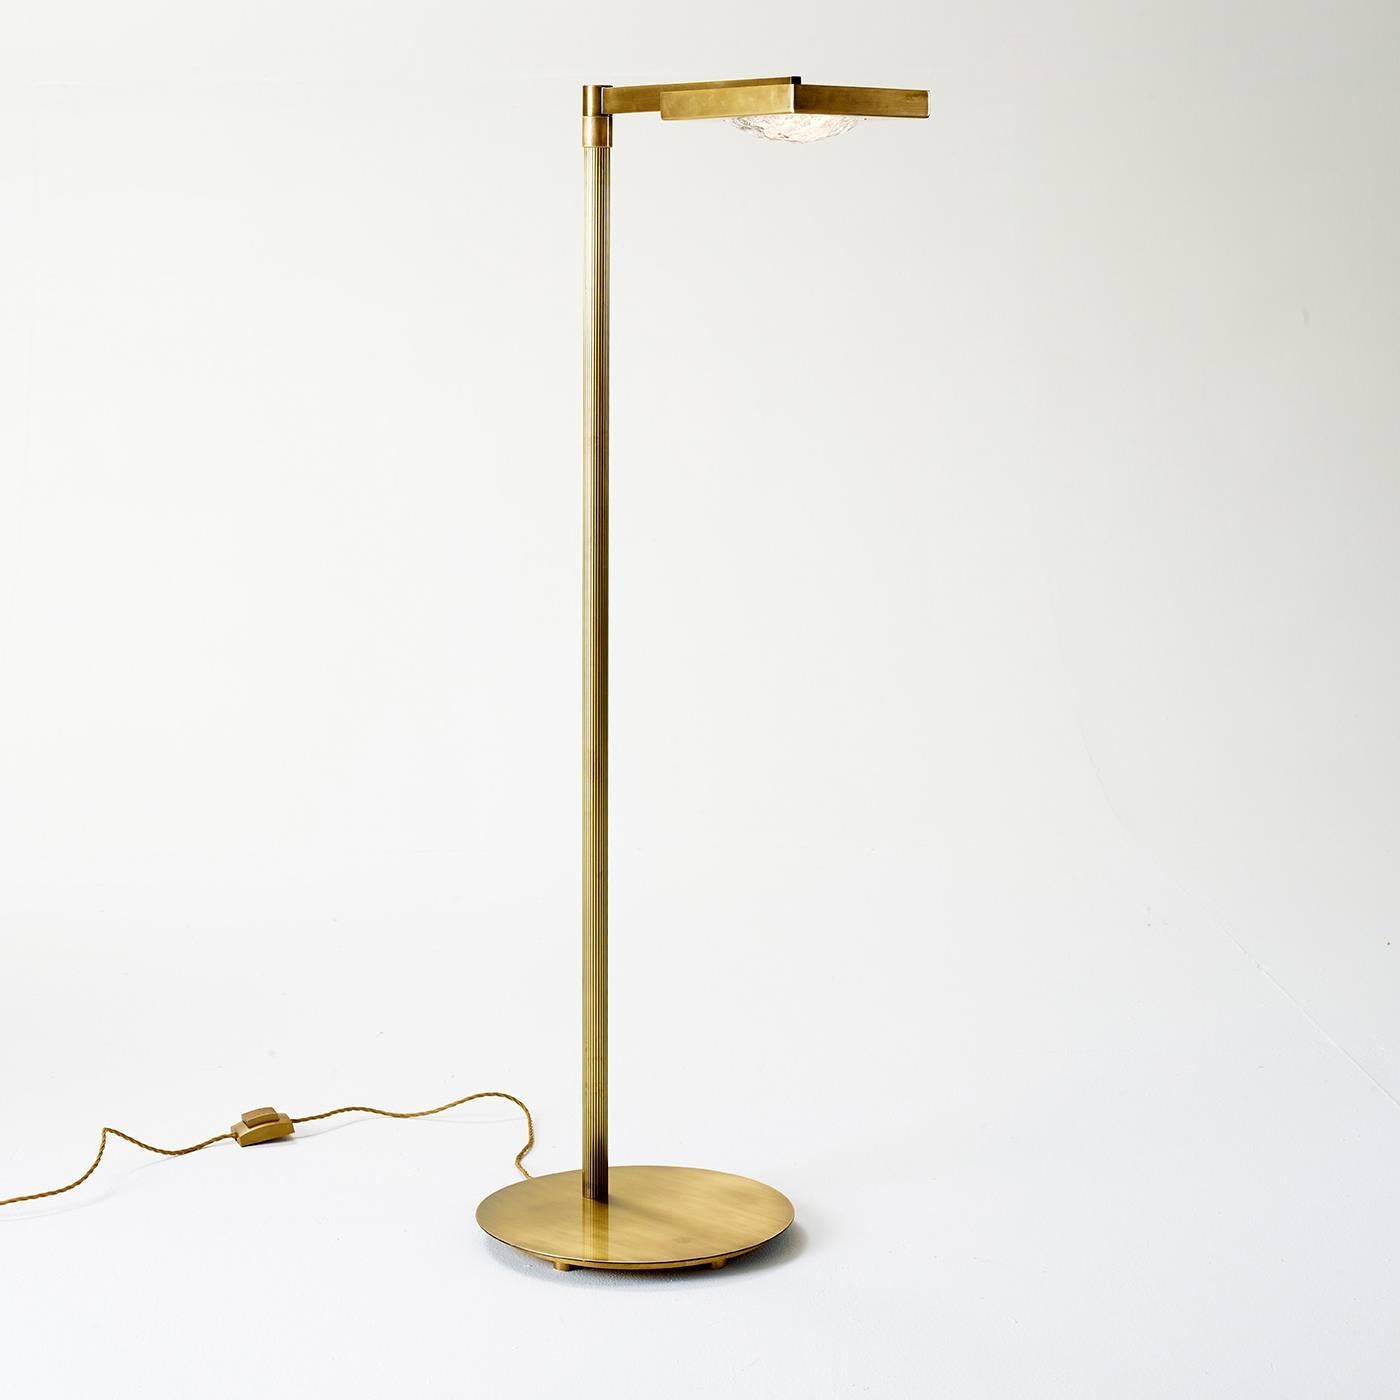 This golden floor lamp by Marioni is primarily made of brass, and is adequately fitted with an adjustable bridge arm on the top, as well as a polycarbonate lens, and a light diffuser that gives an ice effect to the light.